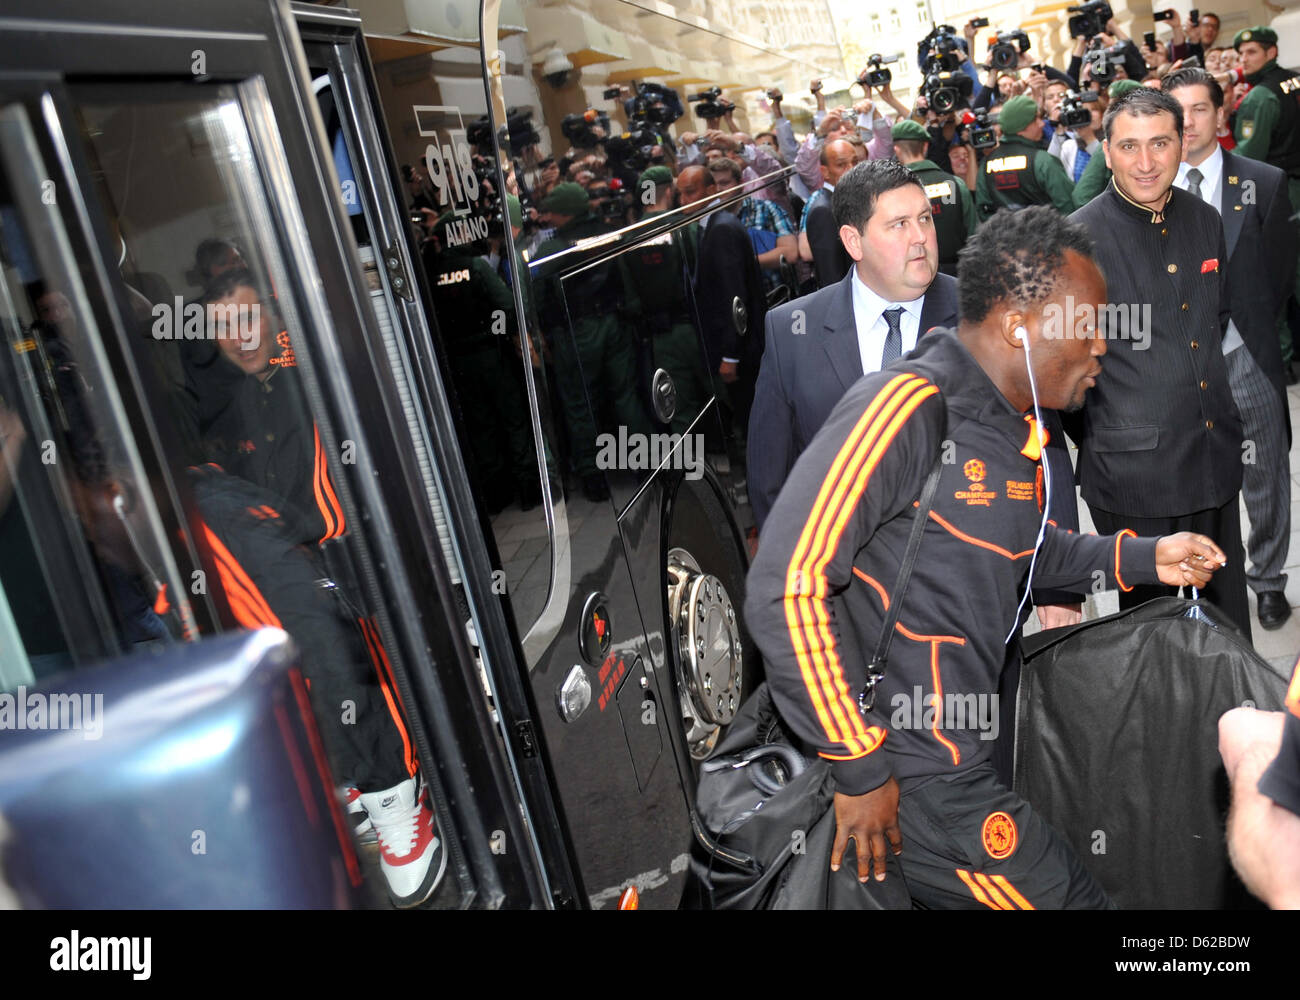 Chelsea's Michael Essien (C) arrives at the hotel in Munich, Germany, 18 May 2012. The final match in the Champions League between FC Bayern Munich and FC Chelsea takes place on 19 May 2012. Photo: FRANK LEONHARDT Stock Photo